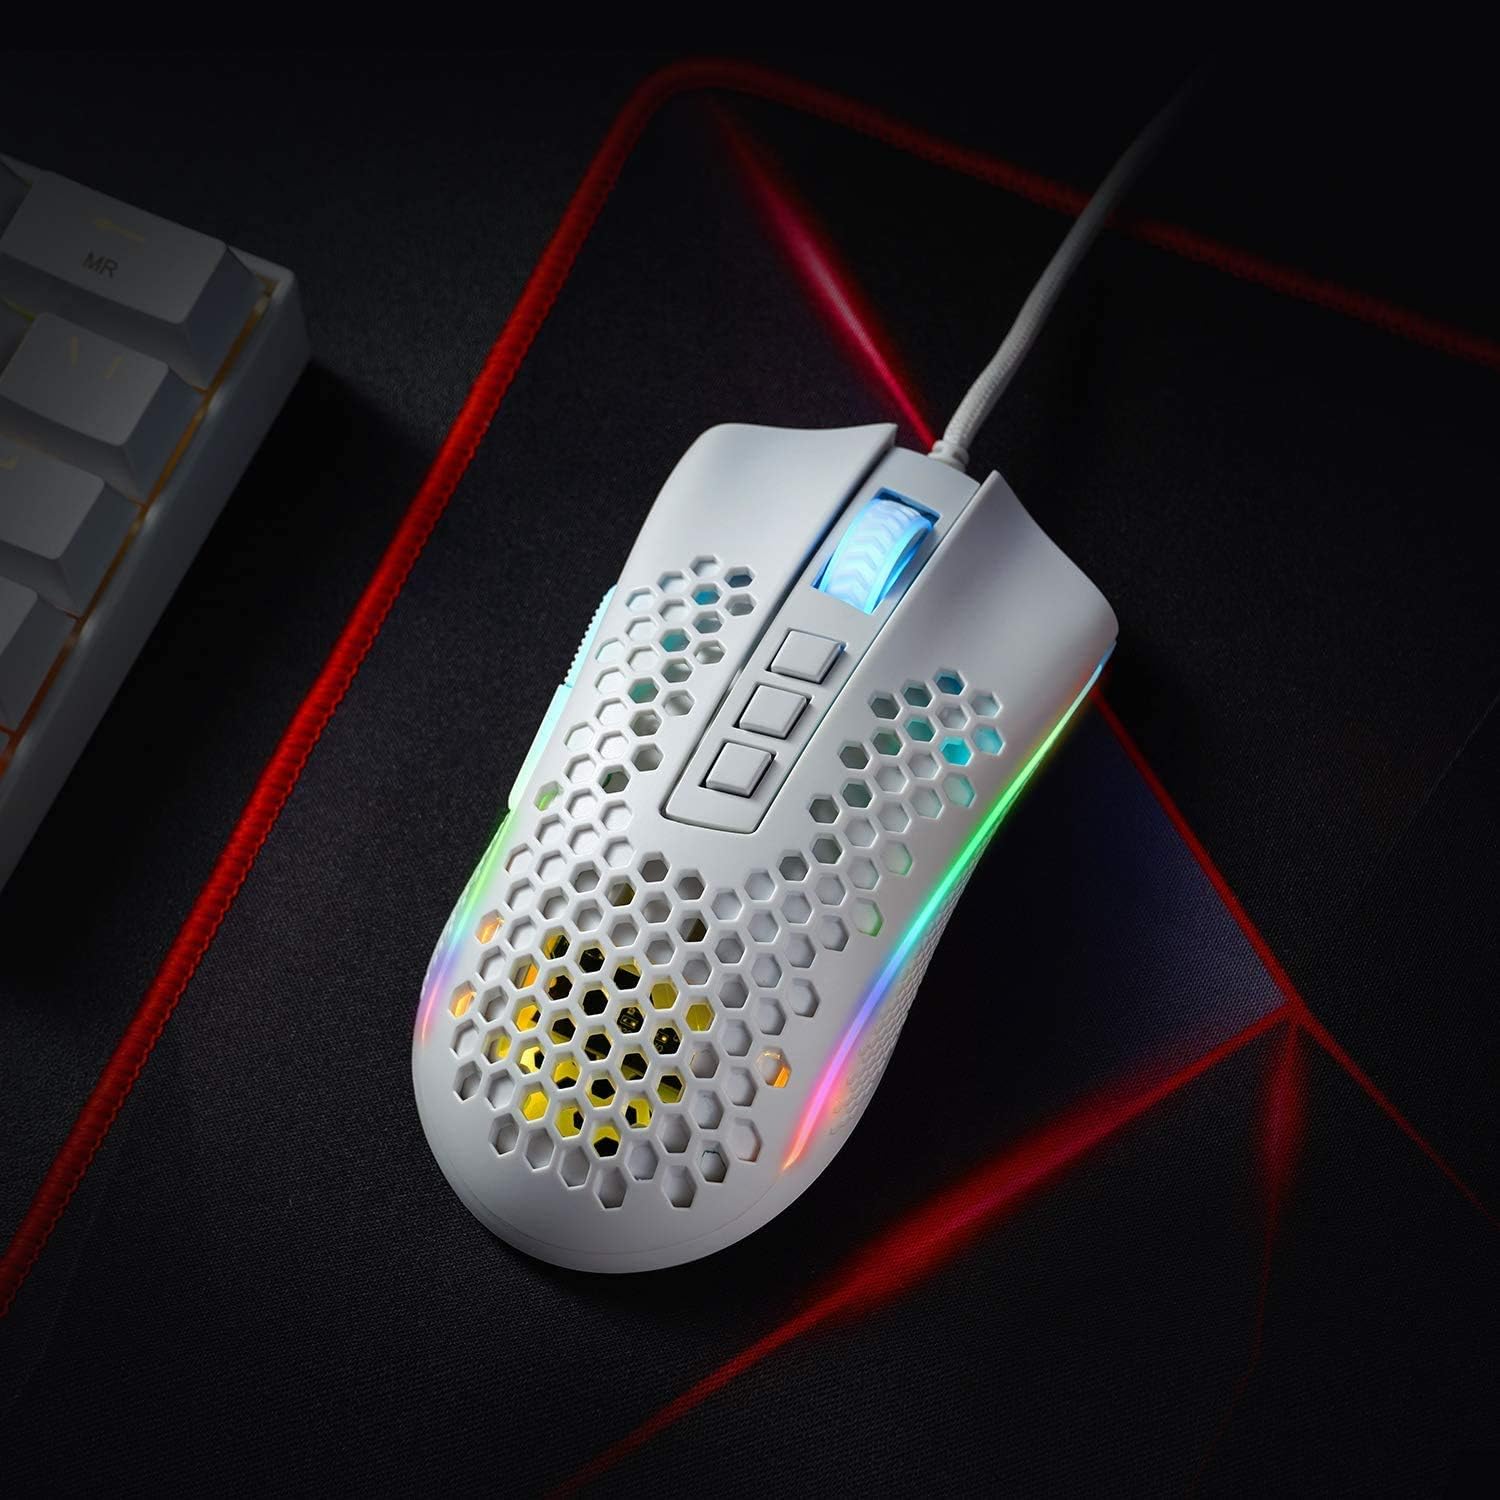 Storm Lightweight RGB Gaming Mouse